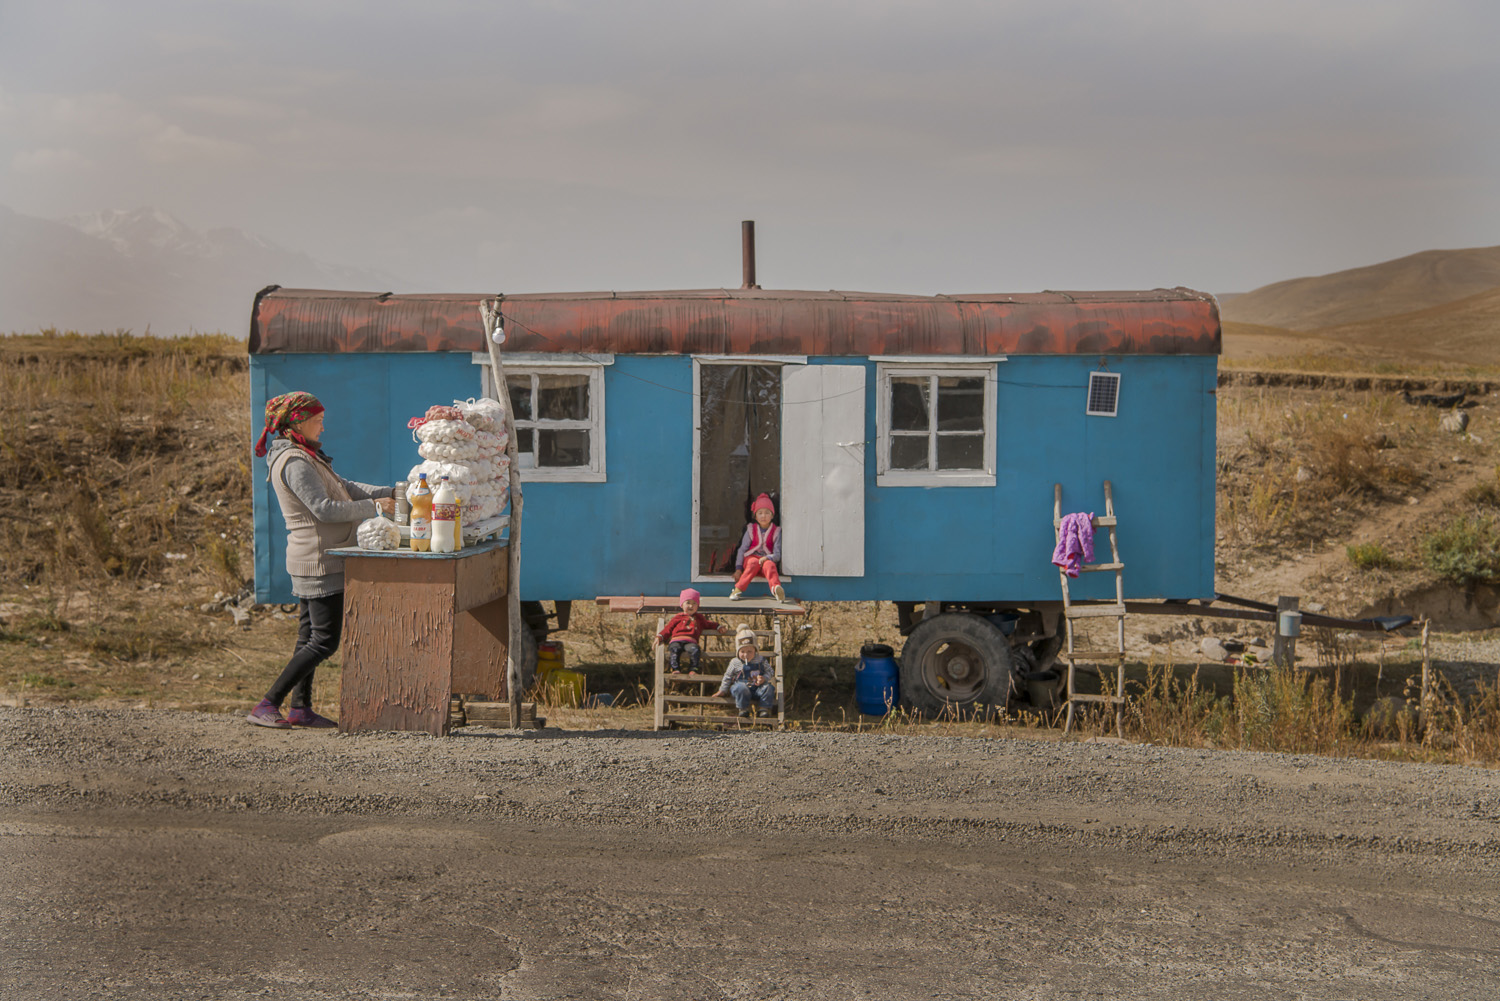 old-railway-carriage-roadside-stalls-market-kyrgyzstan-travel-photography-groceries-osh.jpg